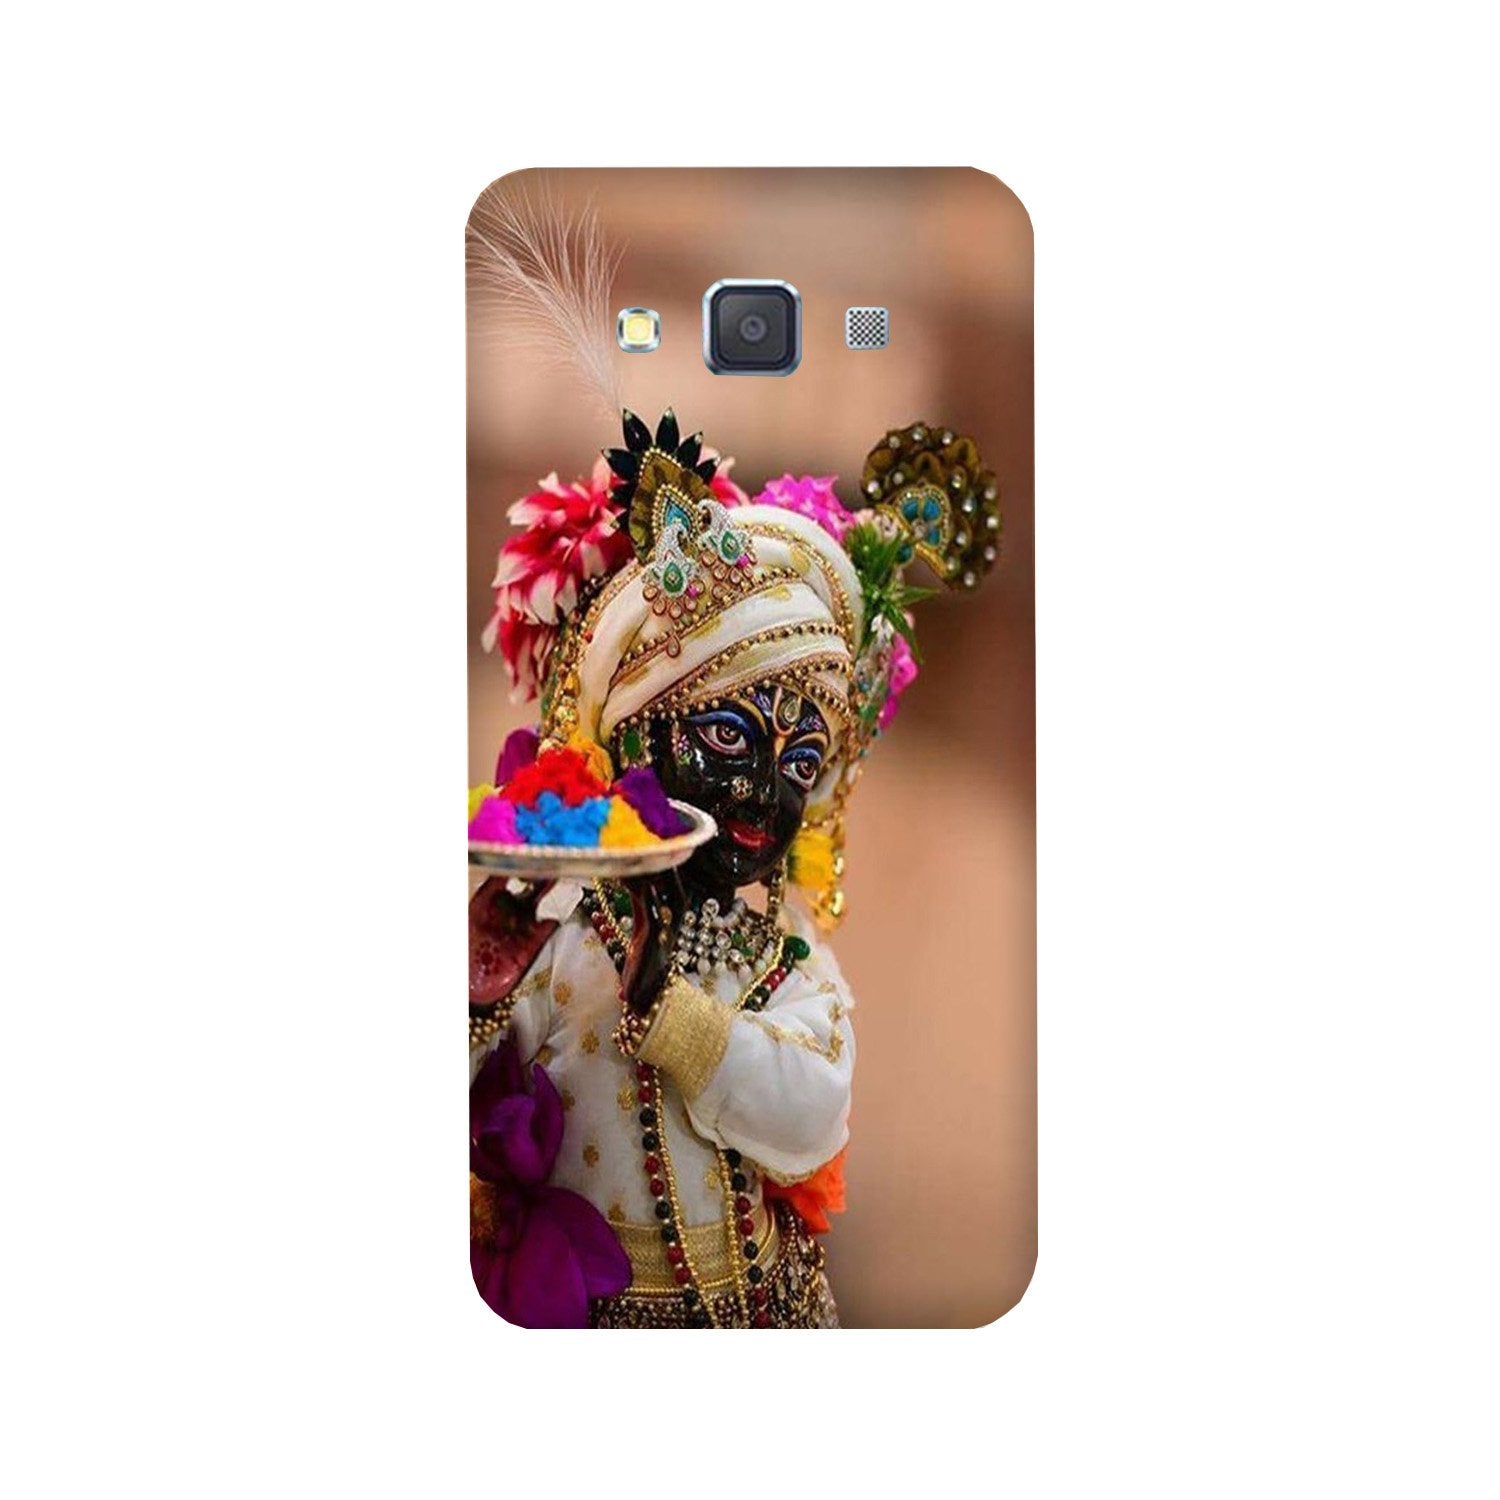 Lord Krishna2 Case for Galaxy ON7/ON7 Pro